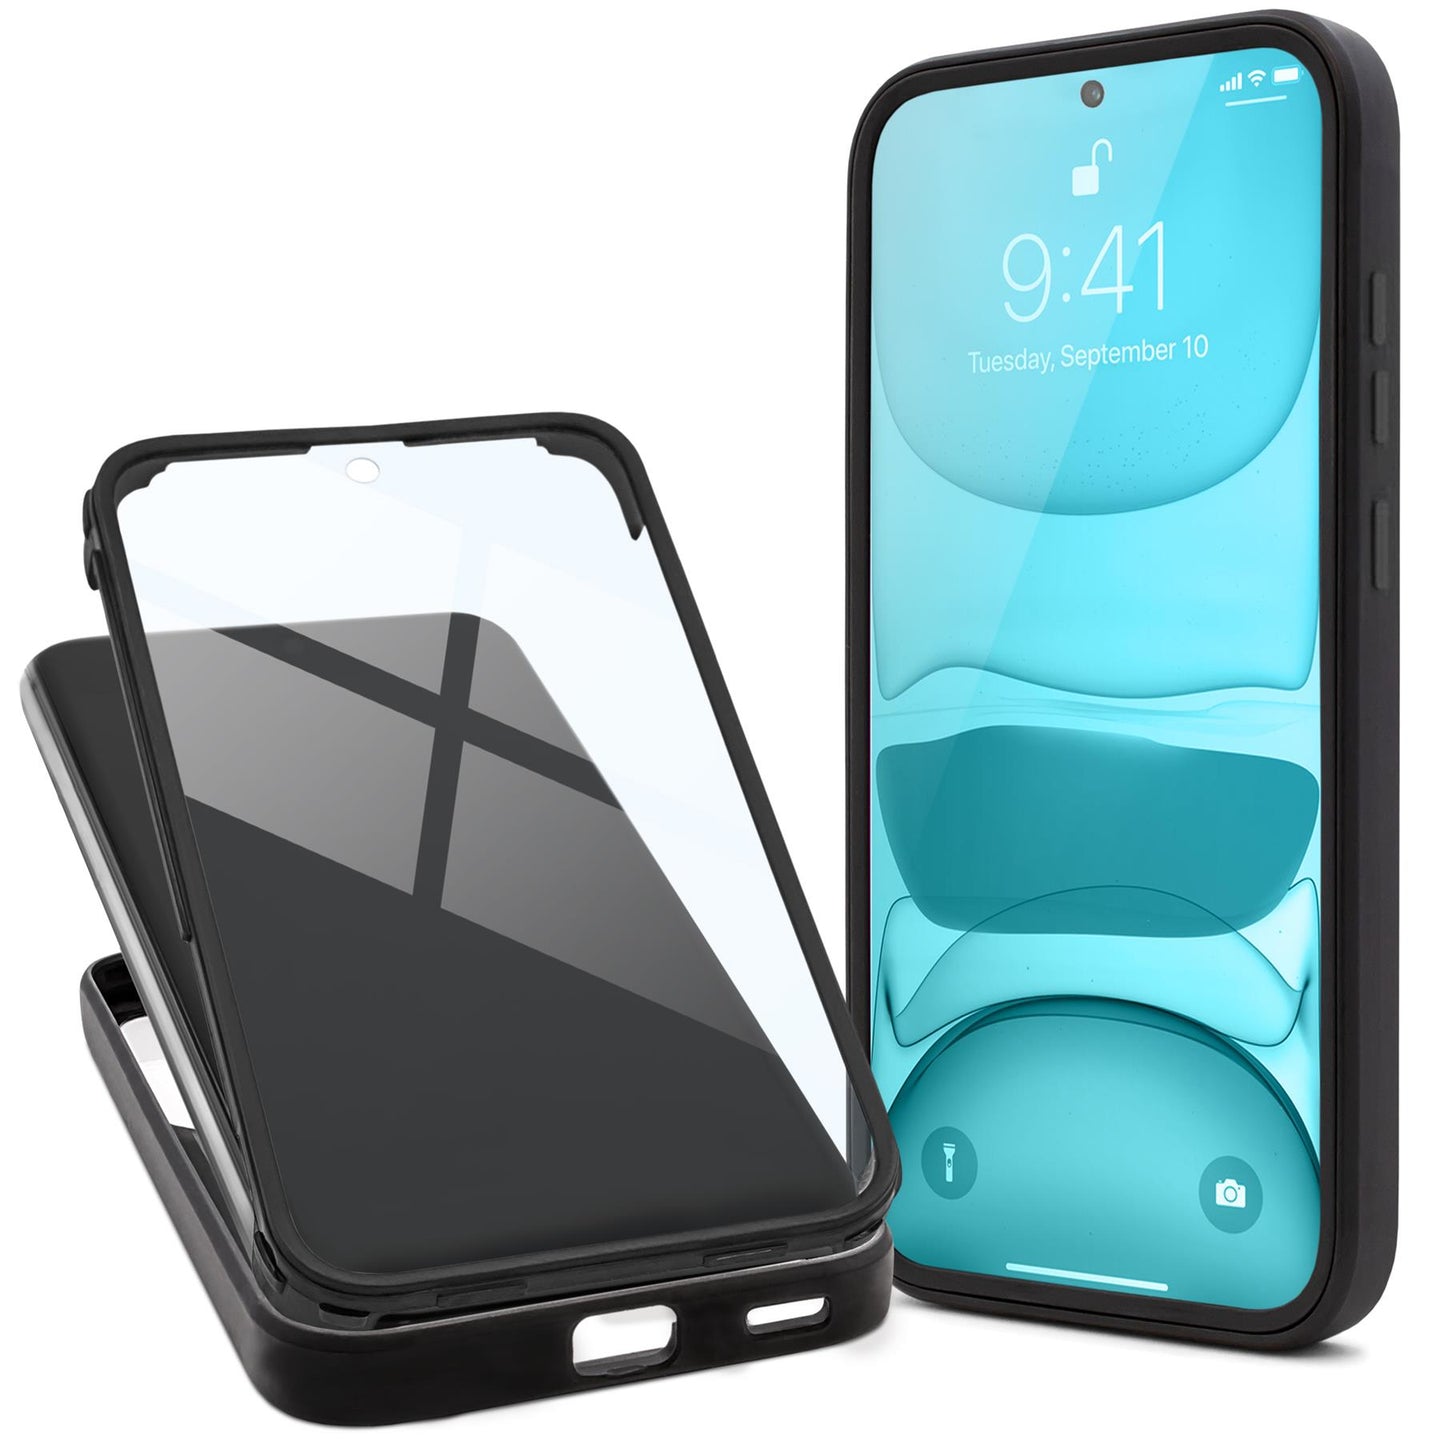 Moozy 360 Case for Samsung S22 - Black Rim Transparent Case, Full Body Double-sided Protection, Cover with Built-in Screen Protector